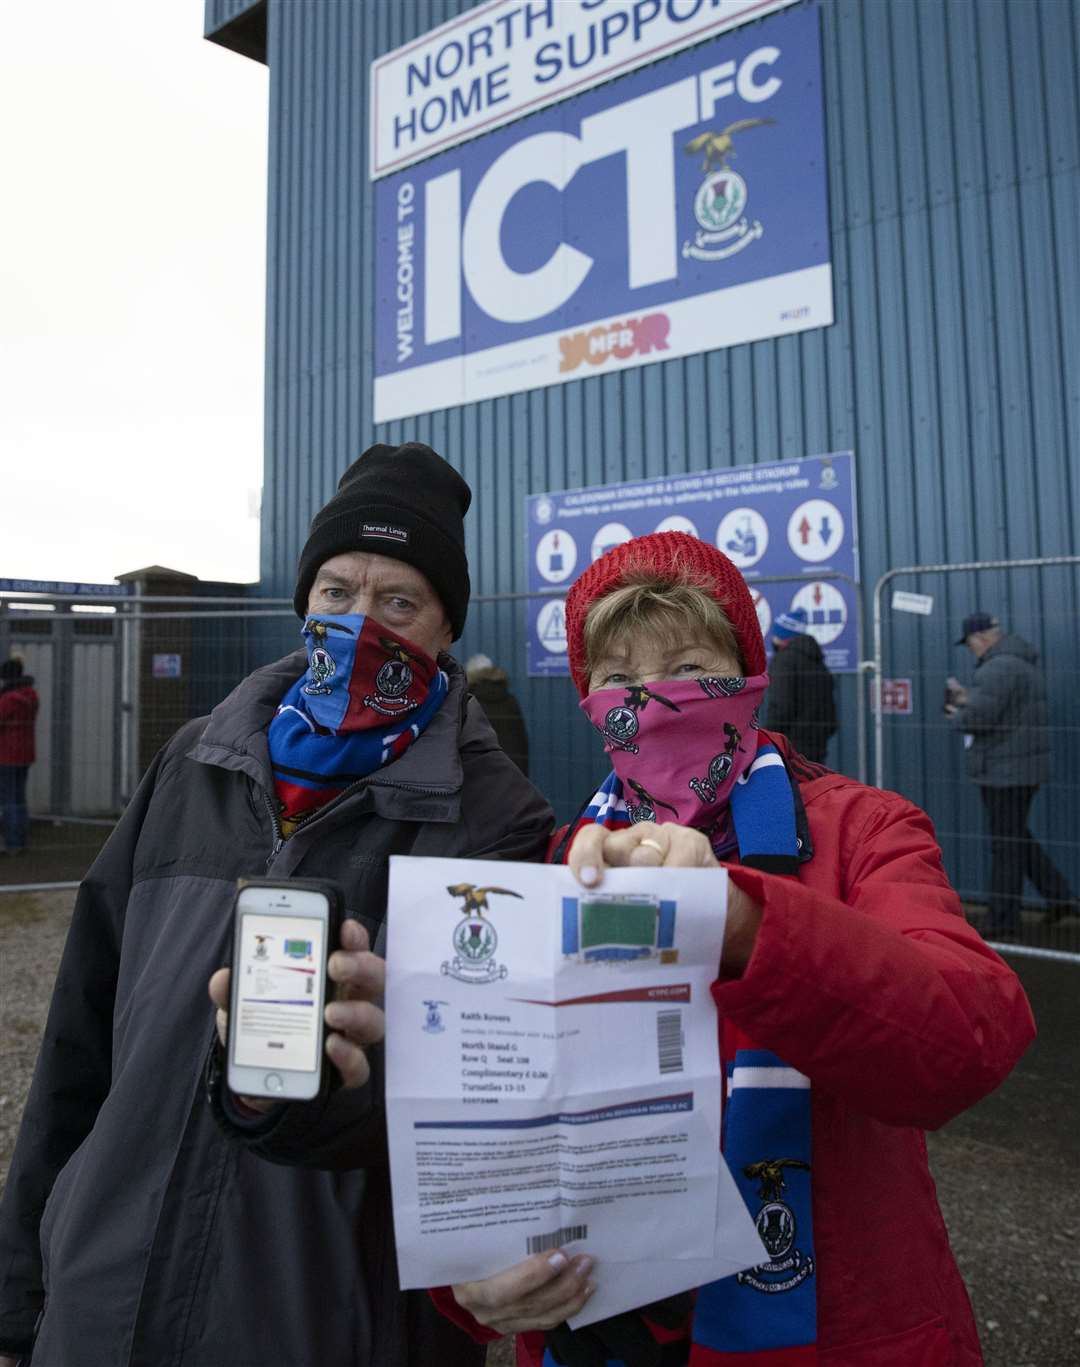 Picture - Ken Macpherson, Inverness. ICT supporters Bob and Kath Fraser were delighted to get tickets for game.